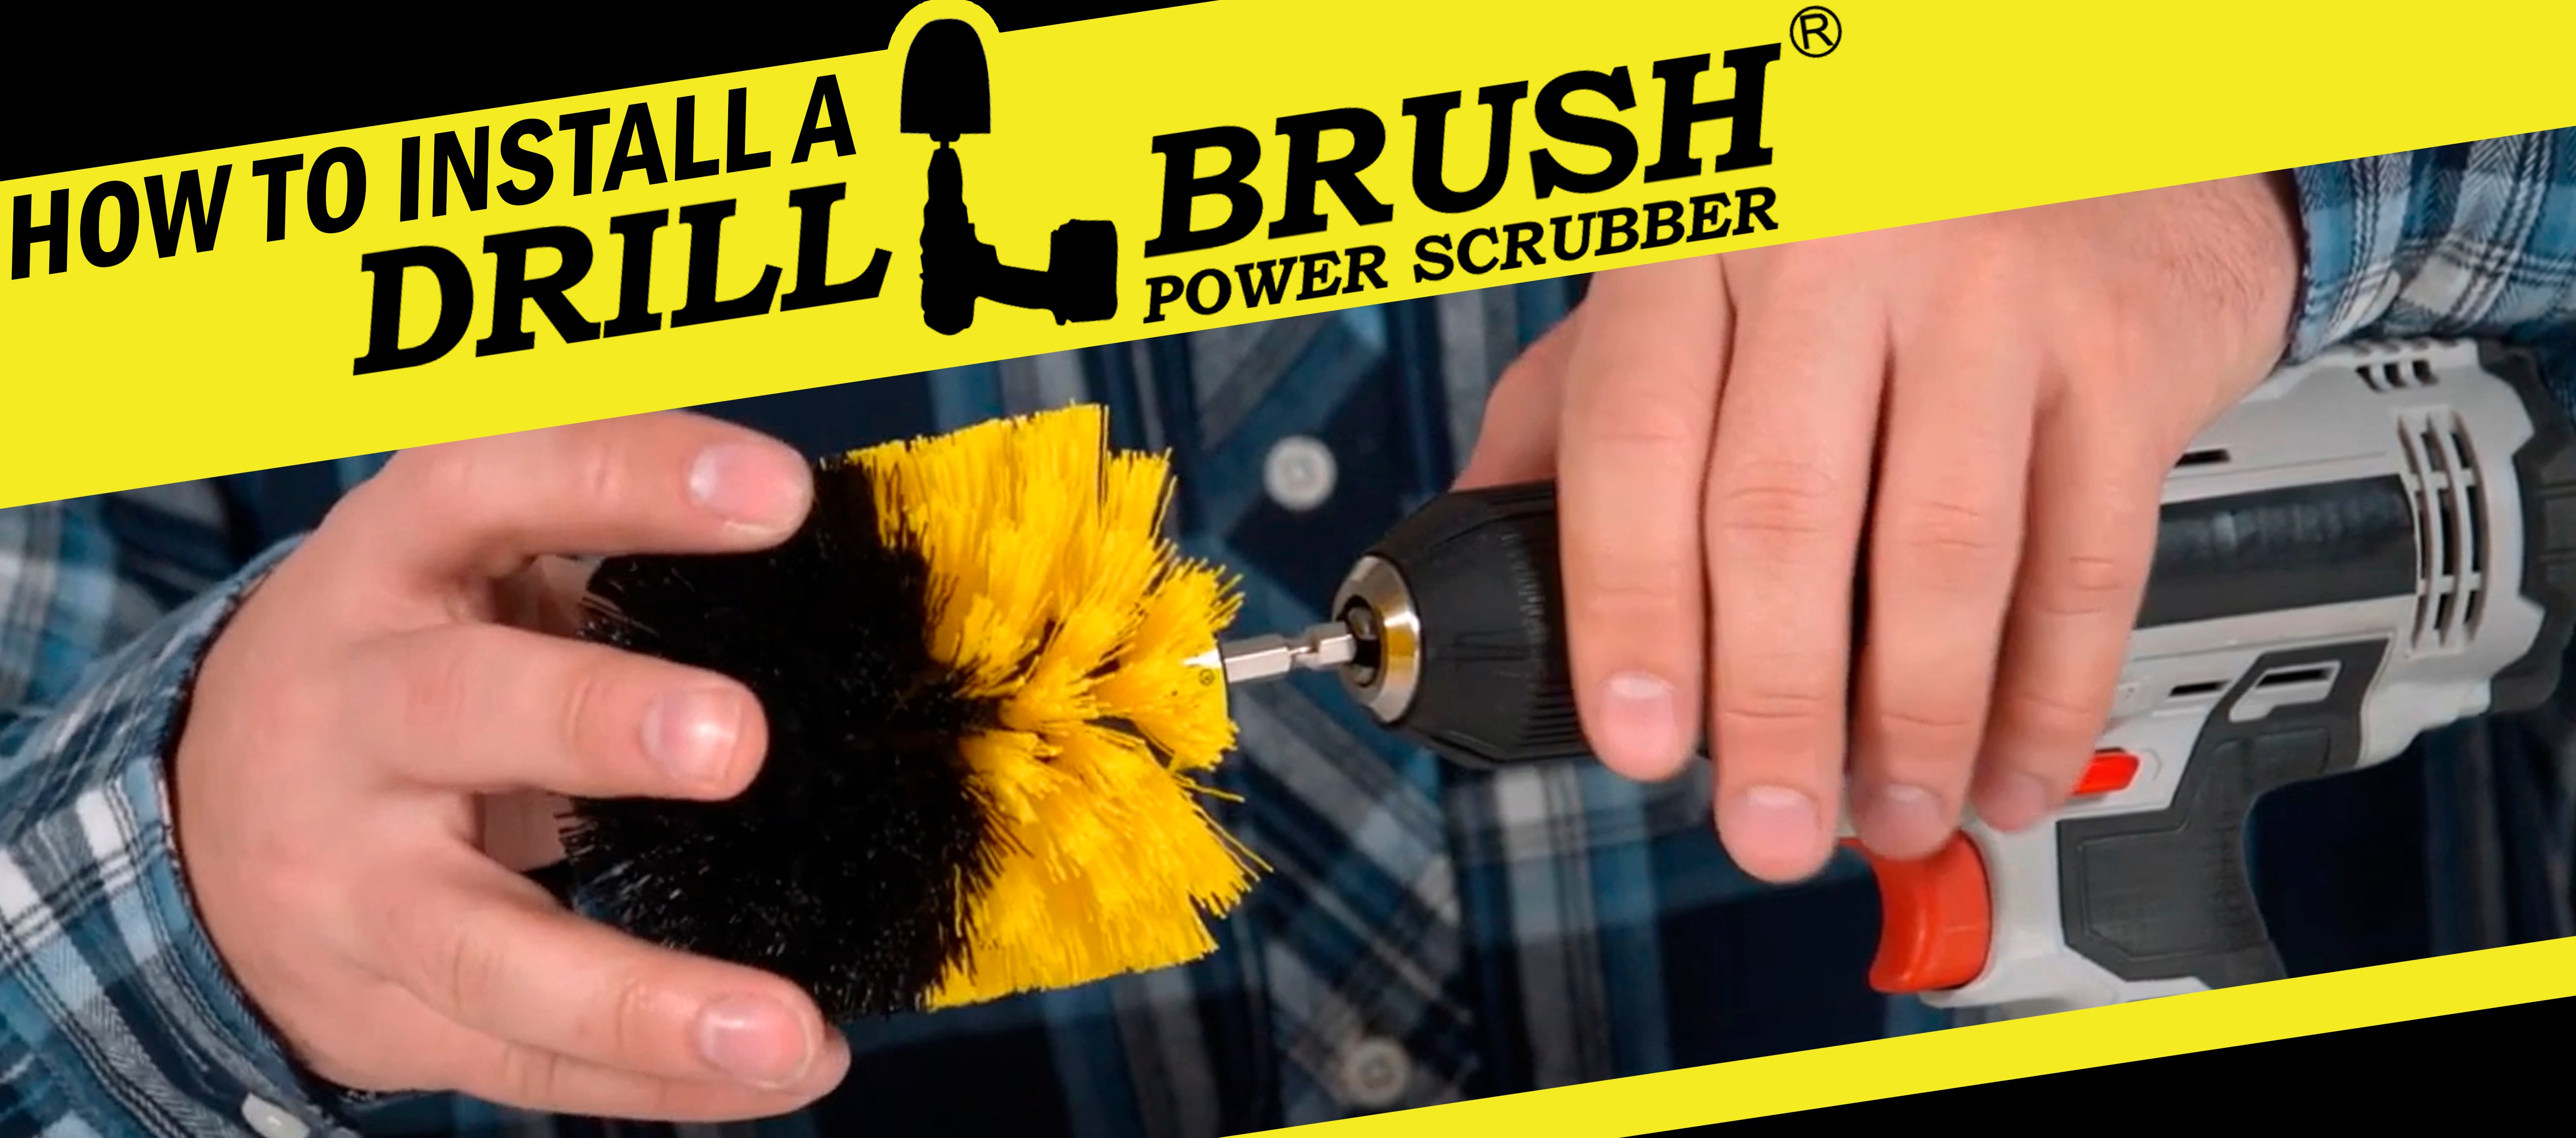 The Best Power Scrubbers of 2022 for Your Home